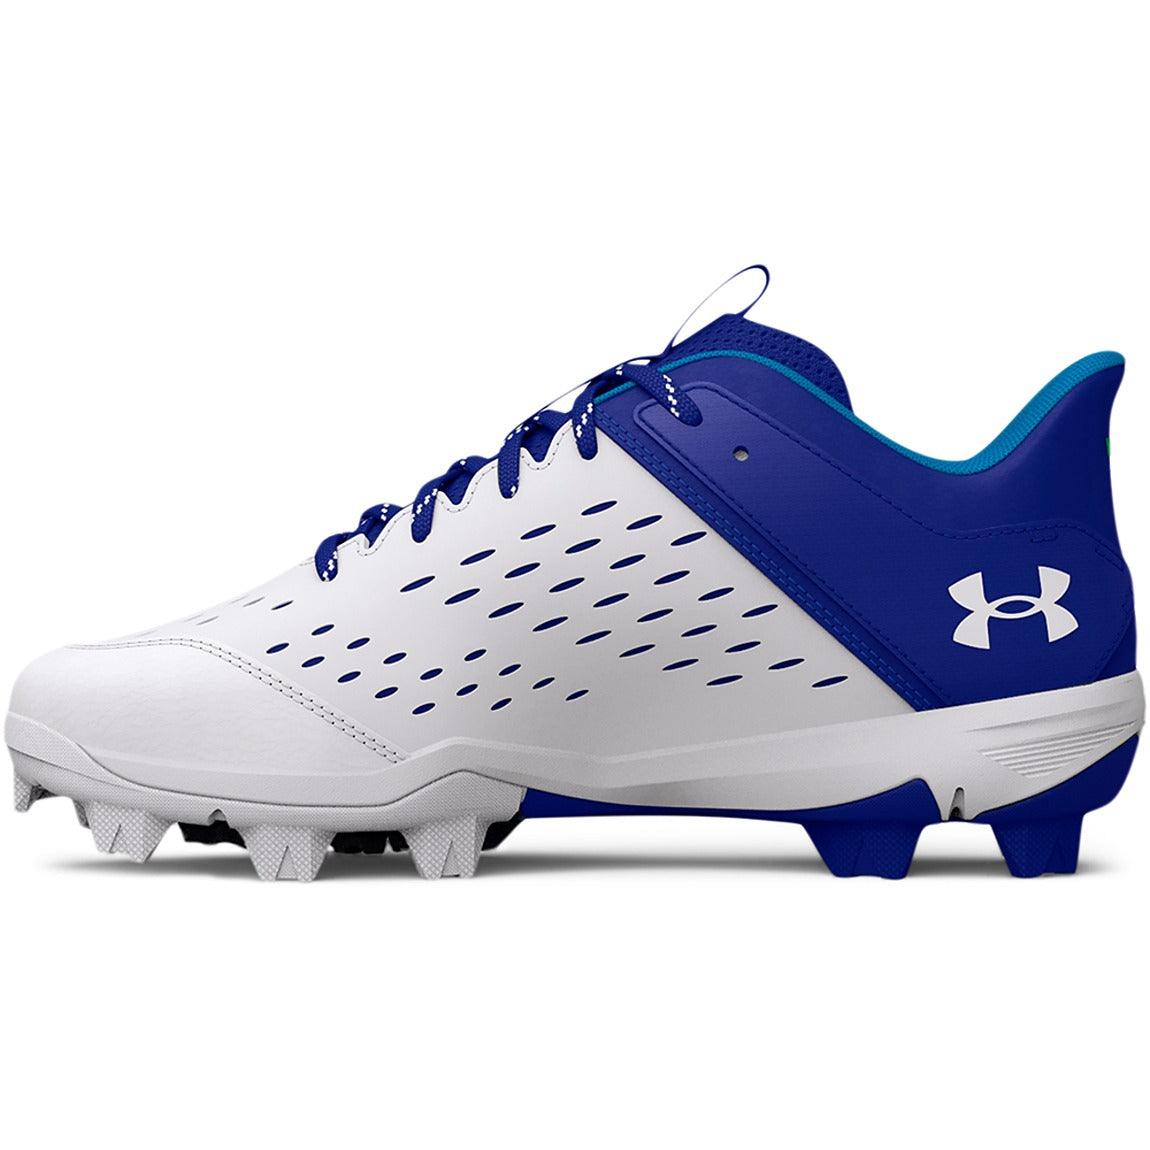 Under Armour Leadoff Low RM Jr. Baseball Cleats - Sports Excellence